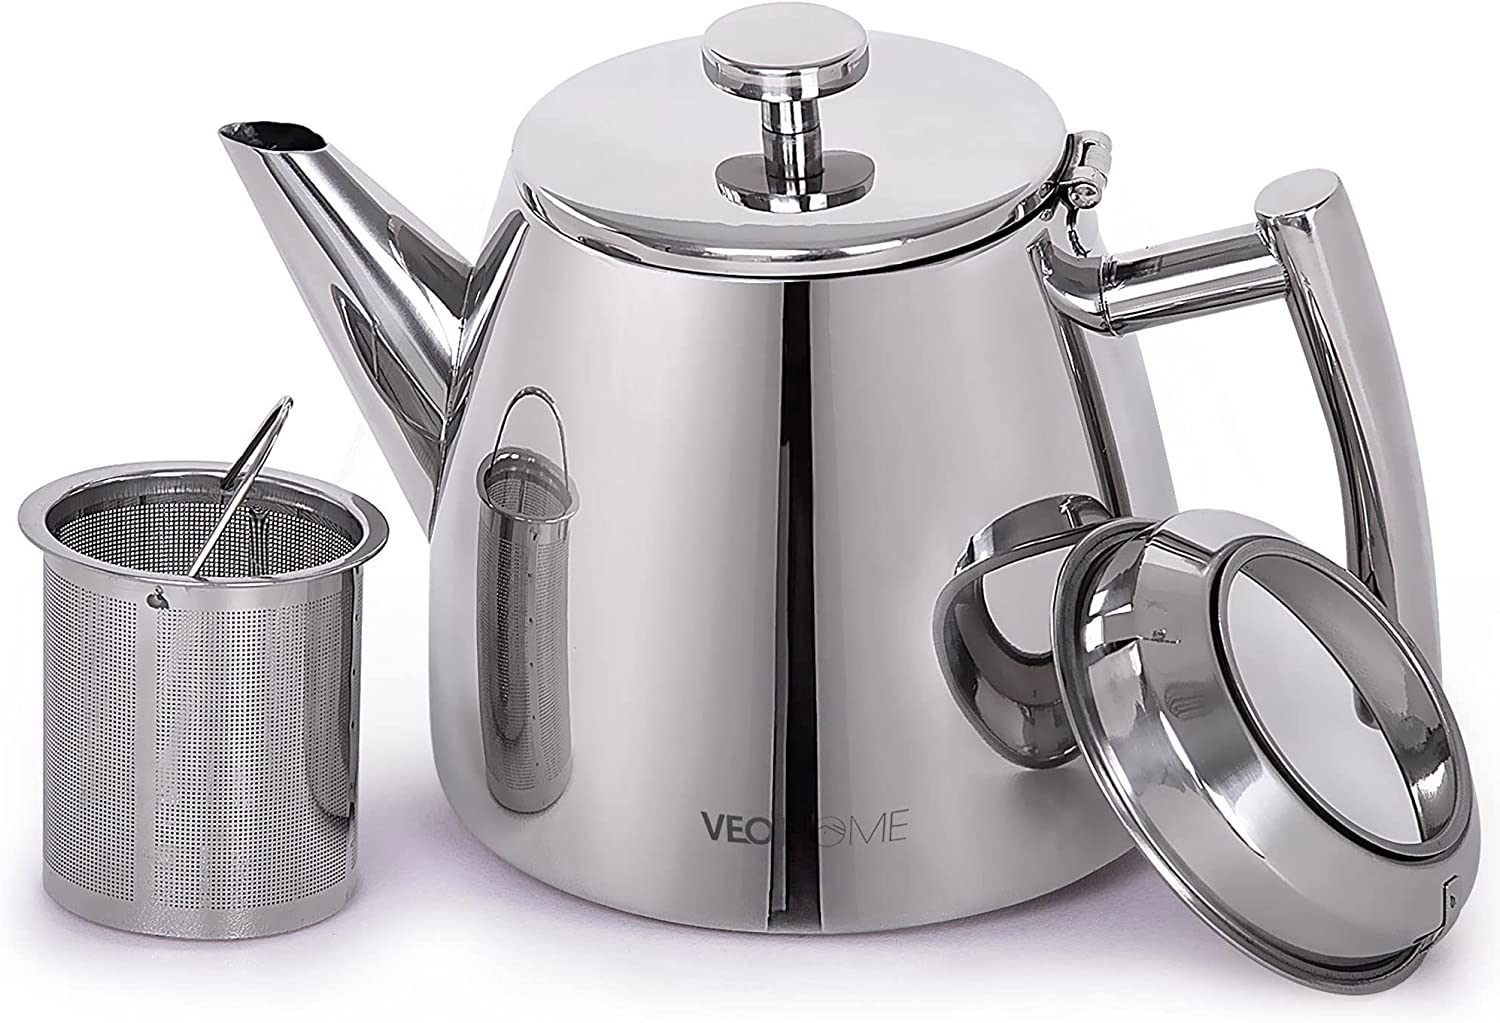 VeoHome Teapot made of stainless steel (0.5 L), with tea infuser for loose tea, strainer insert, double-walled insulation keeps tea warm for longer (0.5 L)